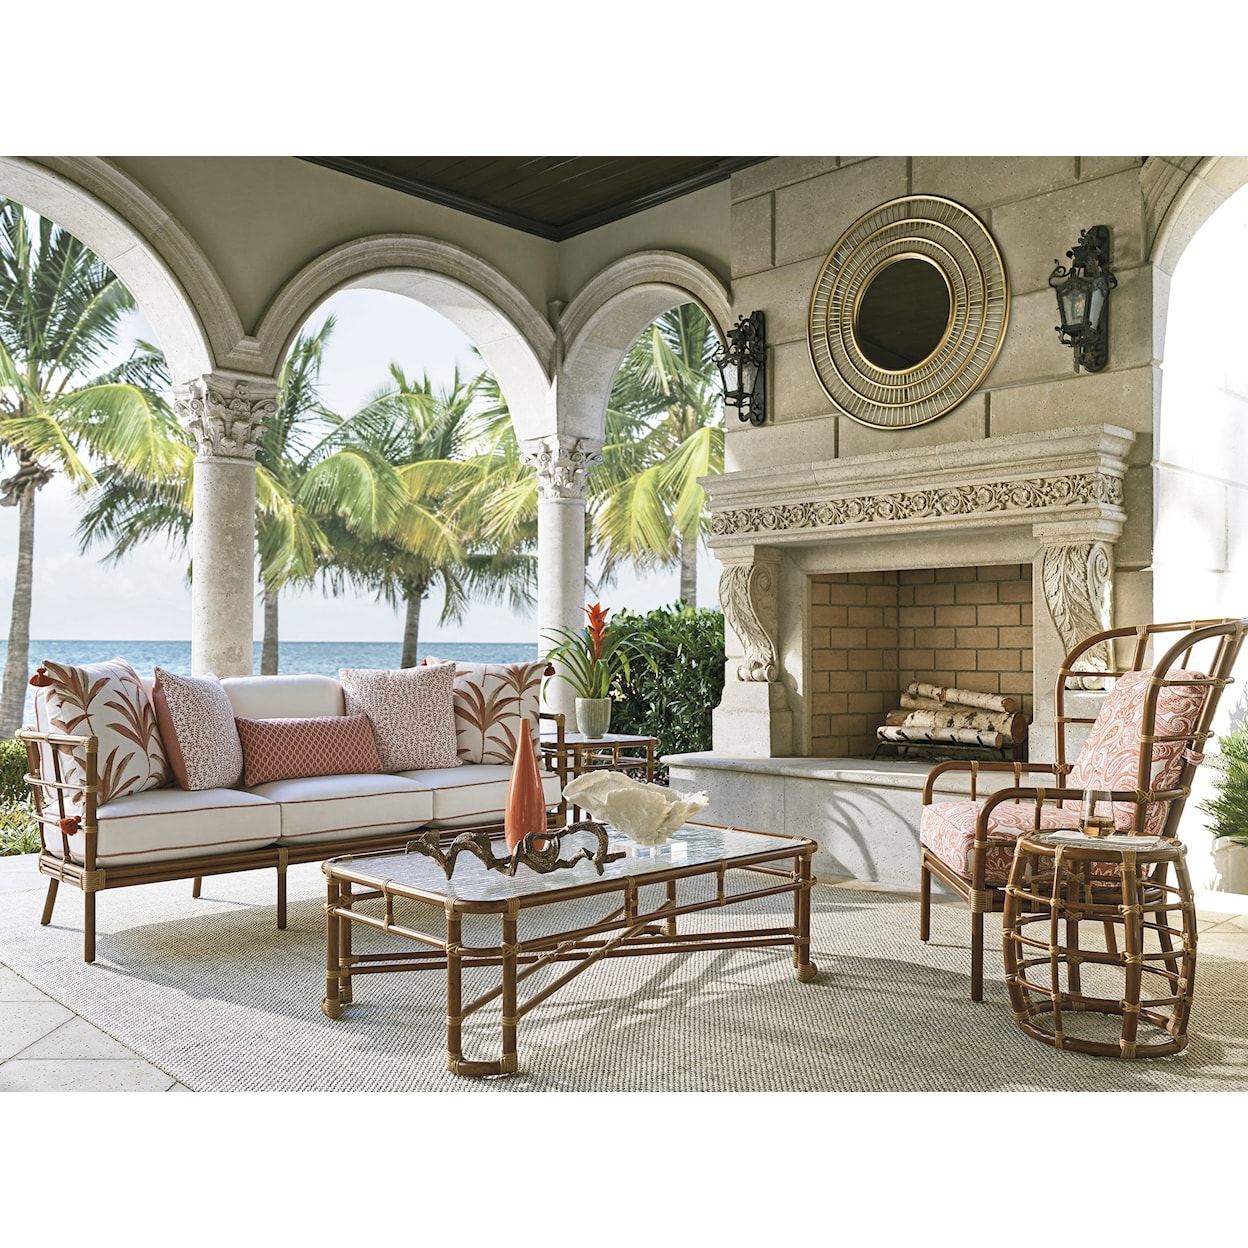 Tommy Bahama Outdoor Living Sandpiper Bay Outdoor Sofa with Curved Arms